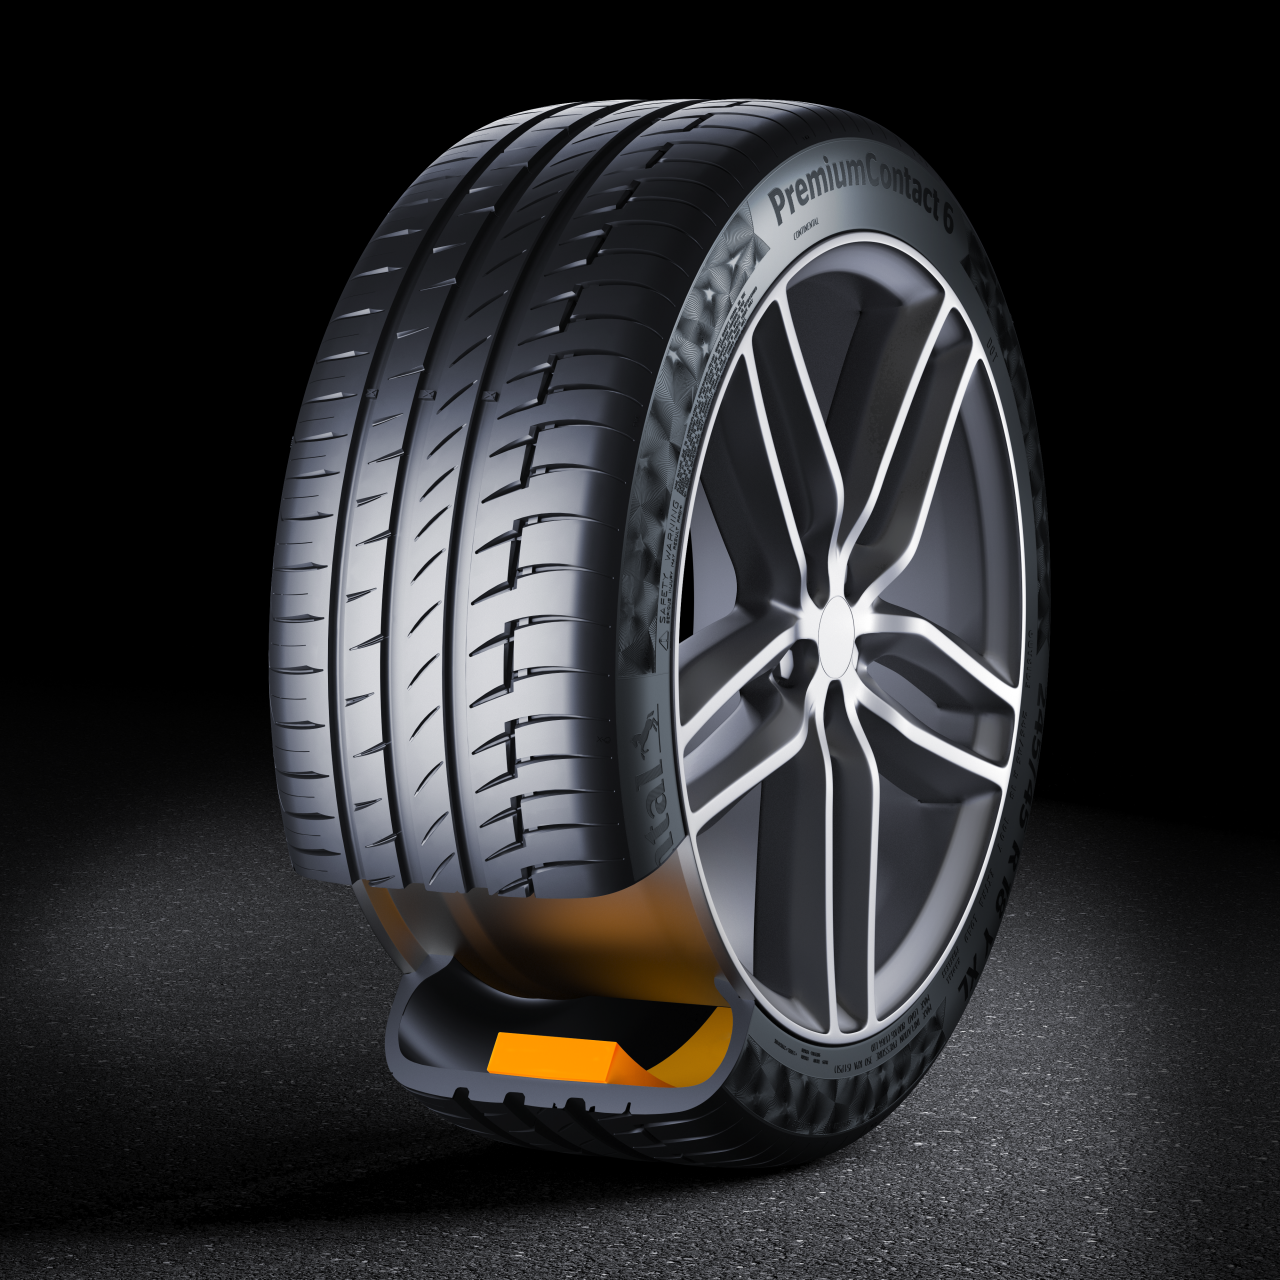 Tire with ContiSilent technology